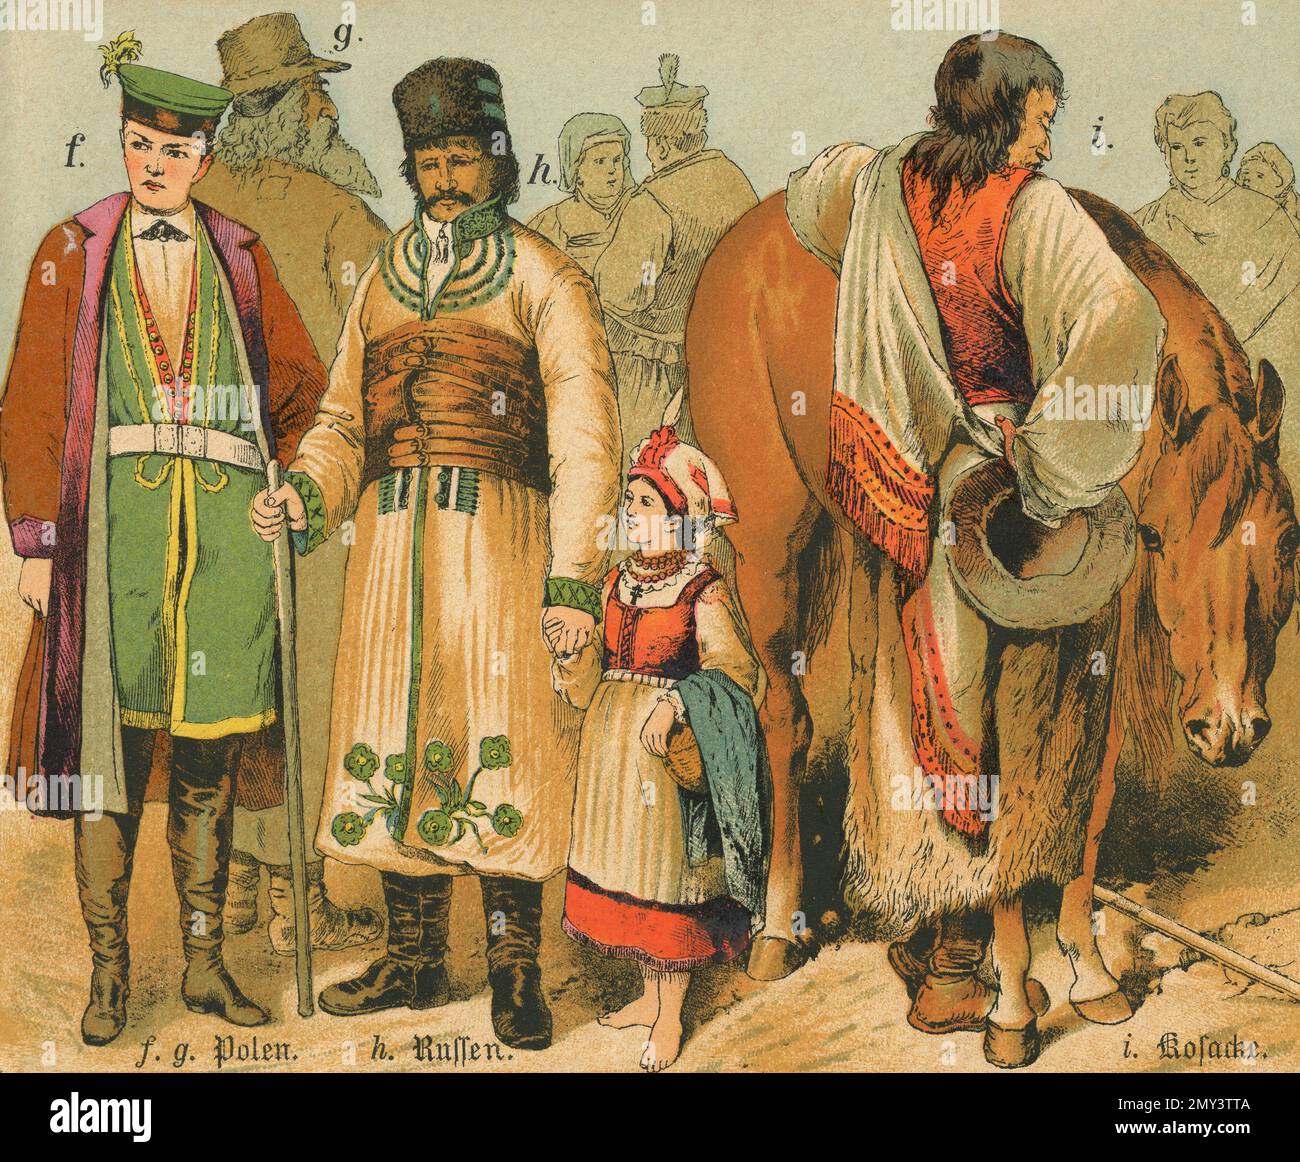 Populations of the world: Polish, Russian, Cossack, color illustration, Germany 1800s Stock Photo